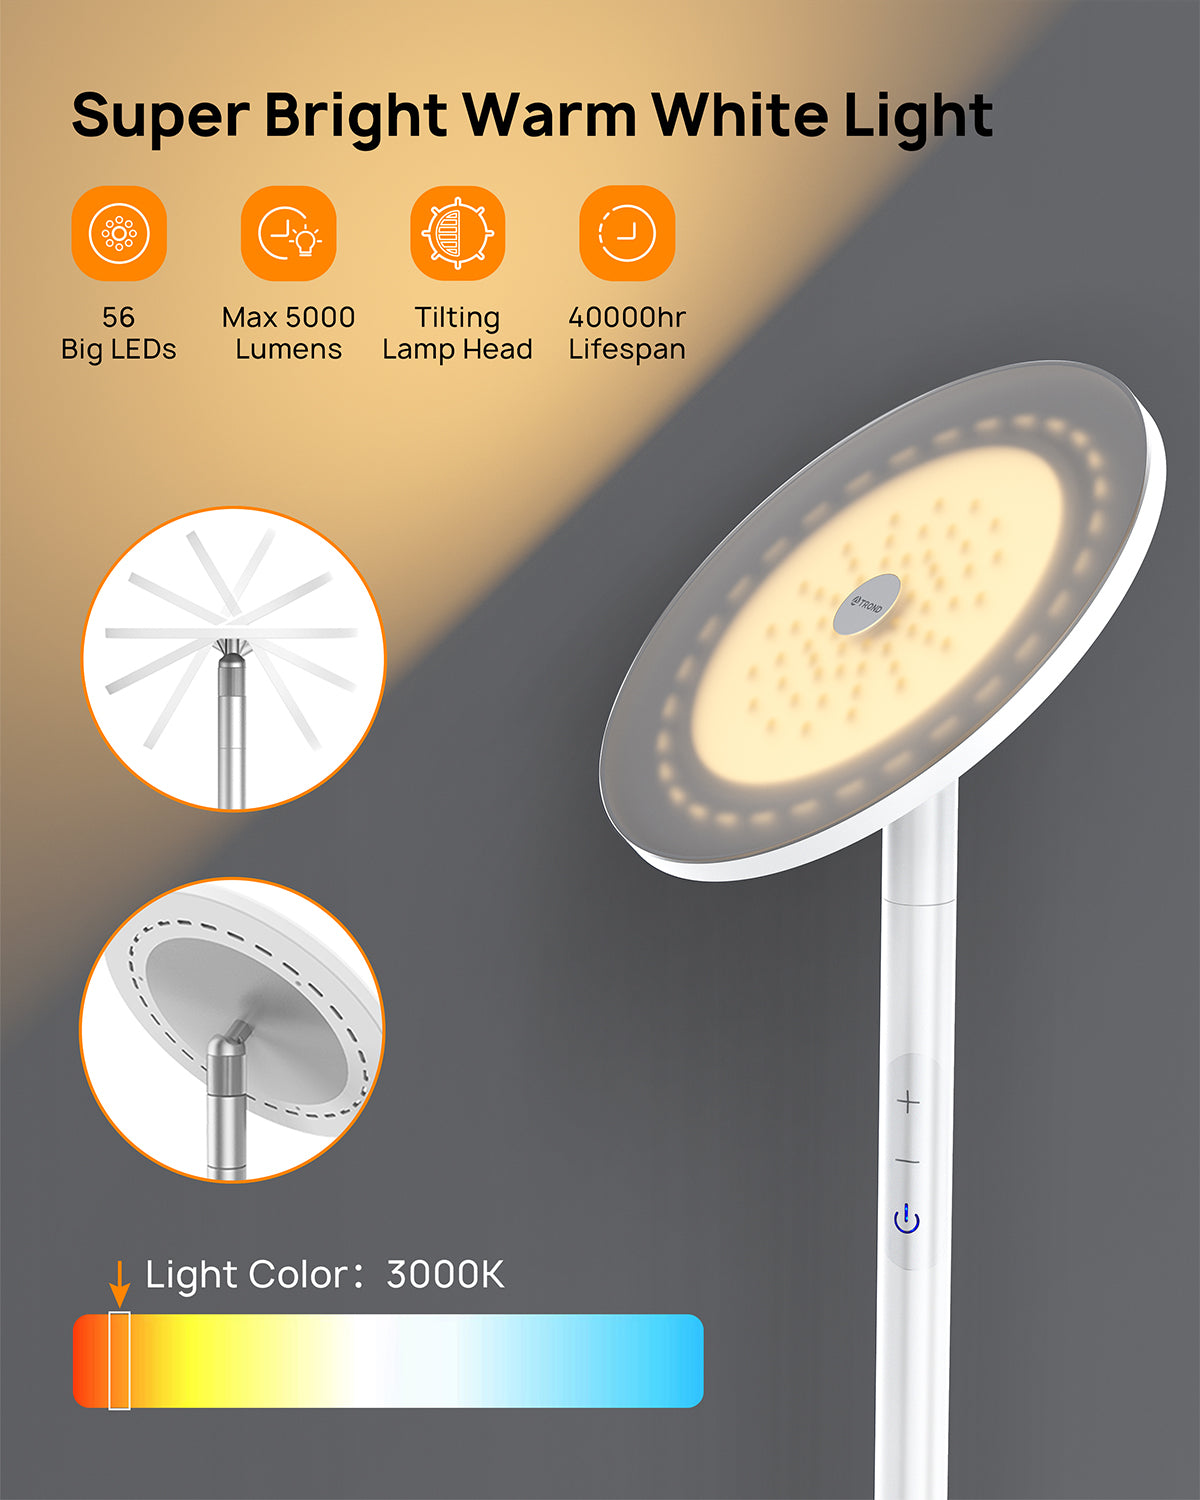 Floor Lamps for Living Room - 5000LM Super Bright LED Torchiere Floor Lamp